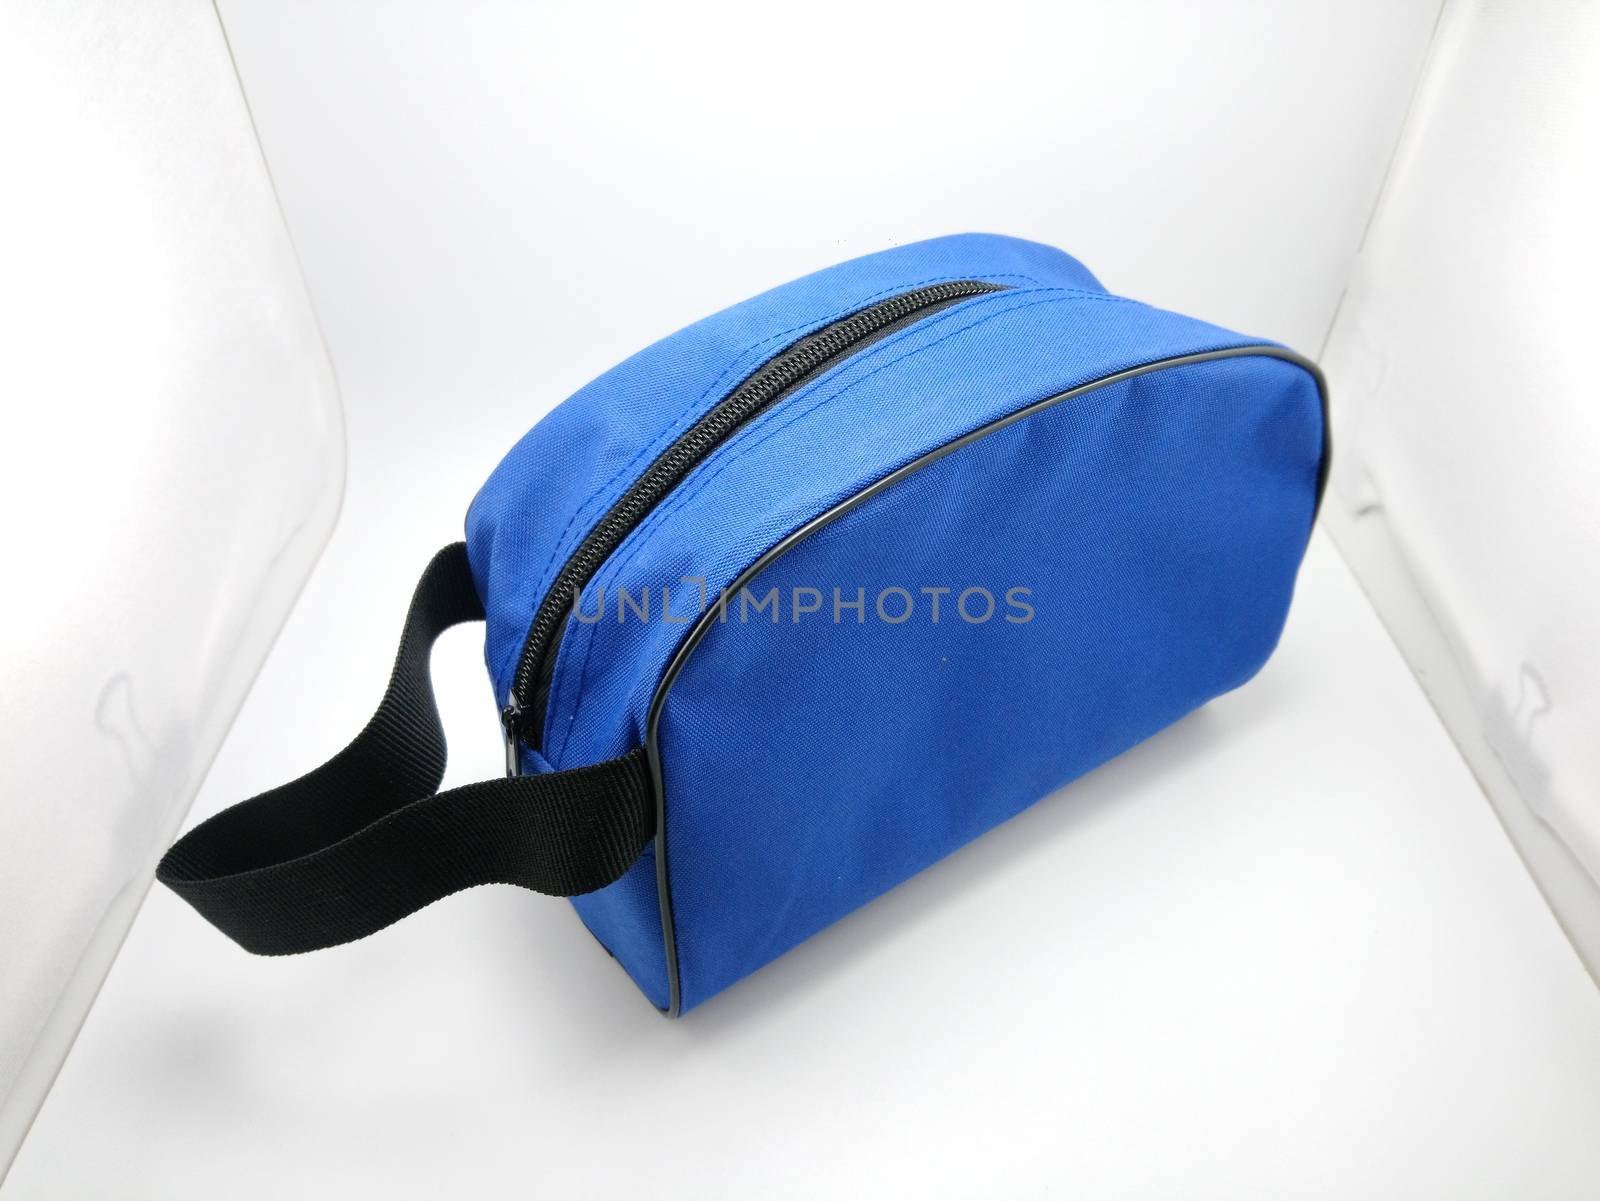 Blue portable hand bag with sling use to put stuffs inside